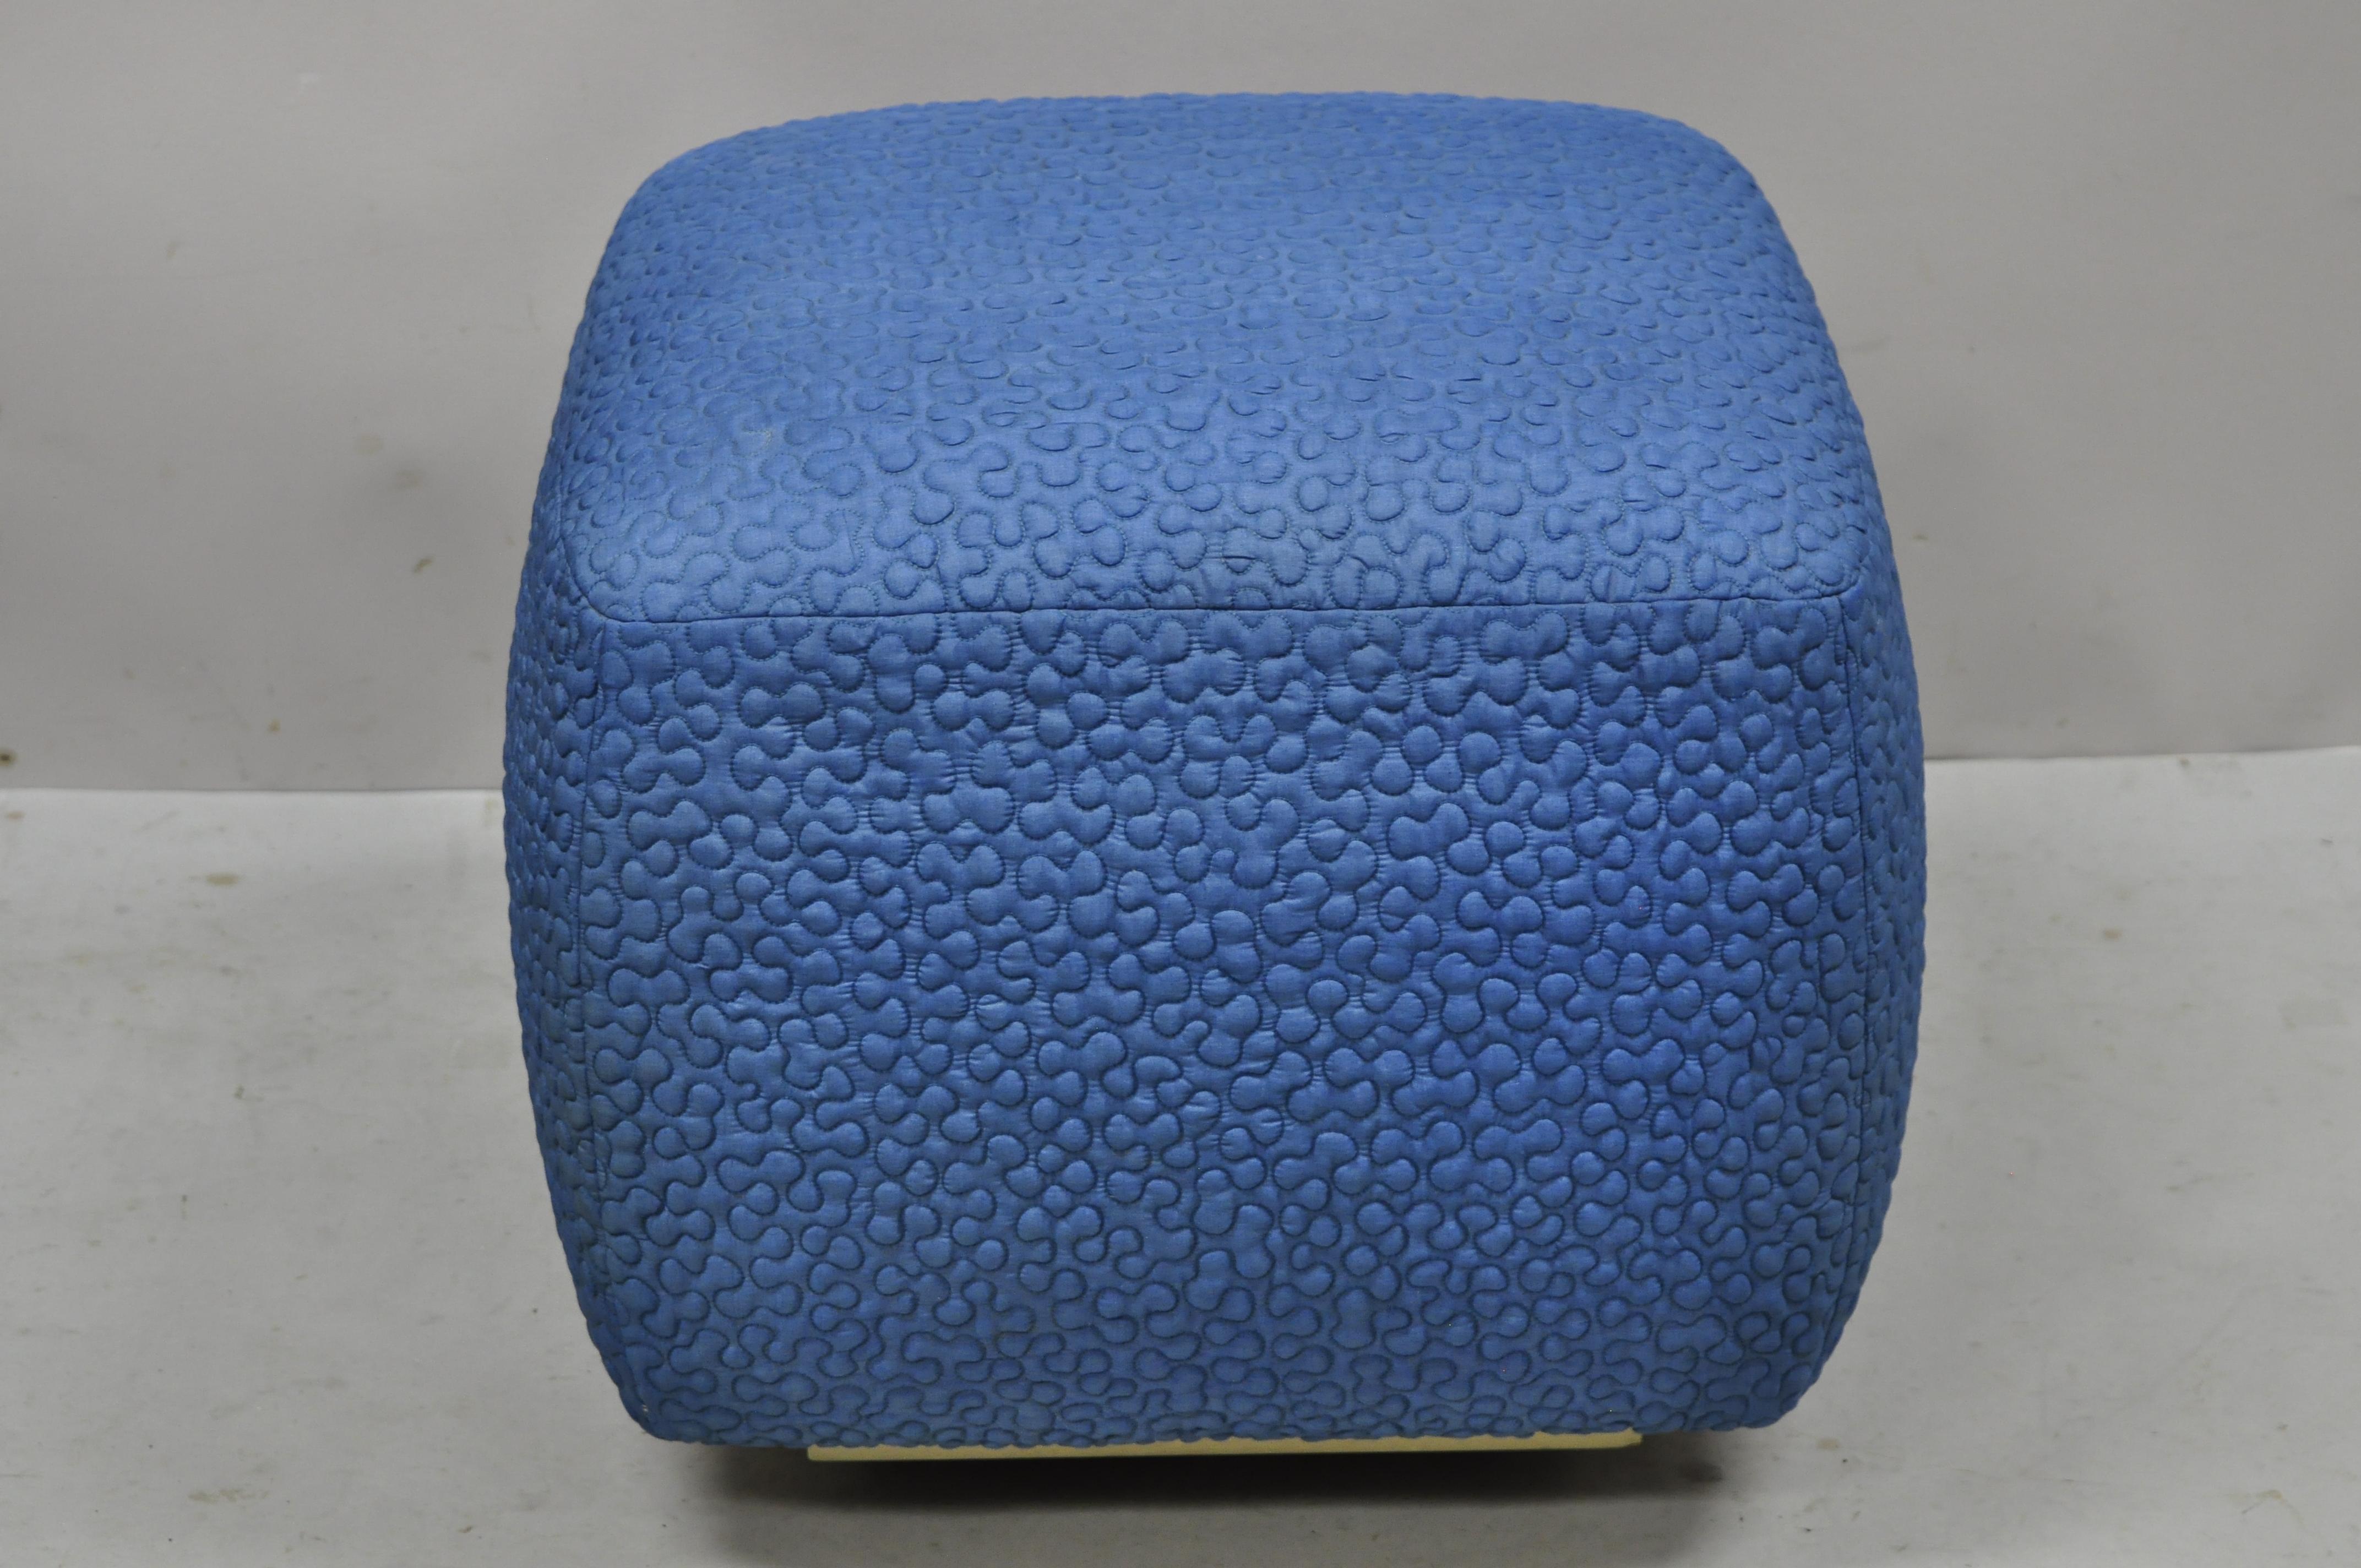 Vintage 1960s Square Pouf Ottoman Blue Stitched Fabric Rolling Casters Wheels In Good Condition For Sale In Philadelphia, PA